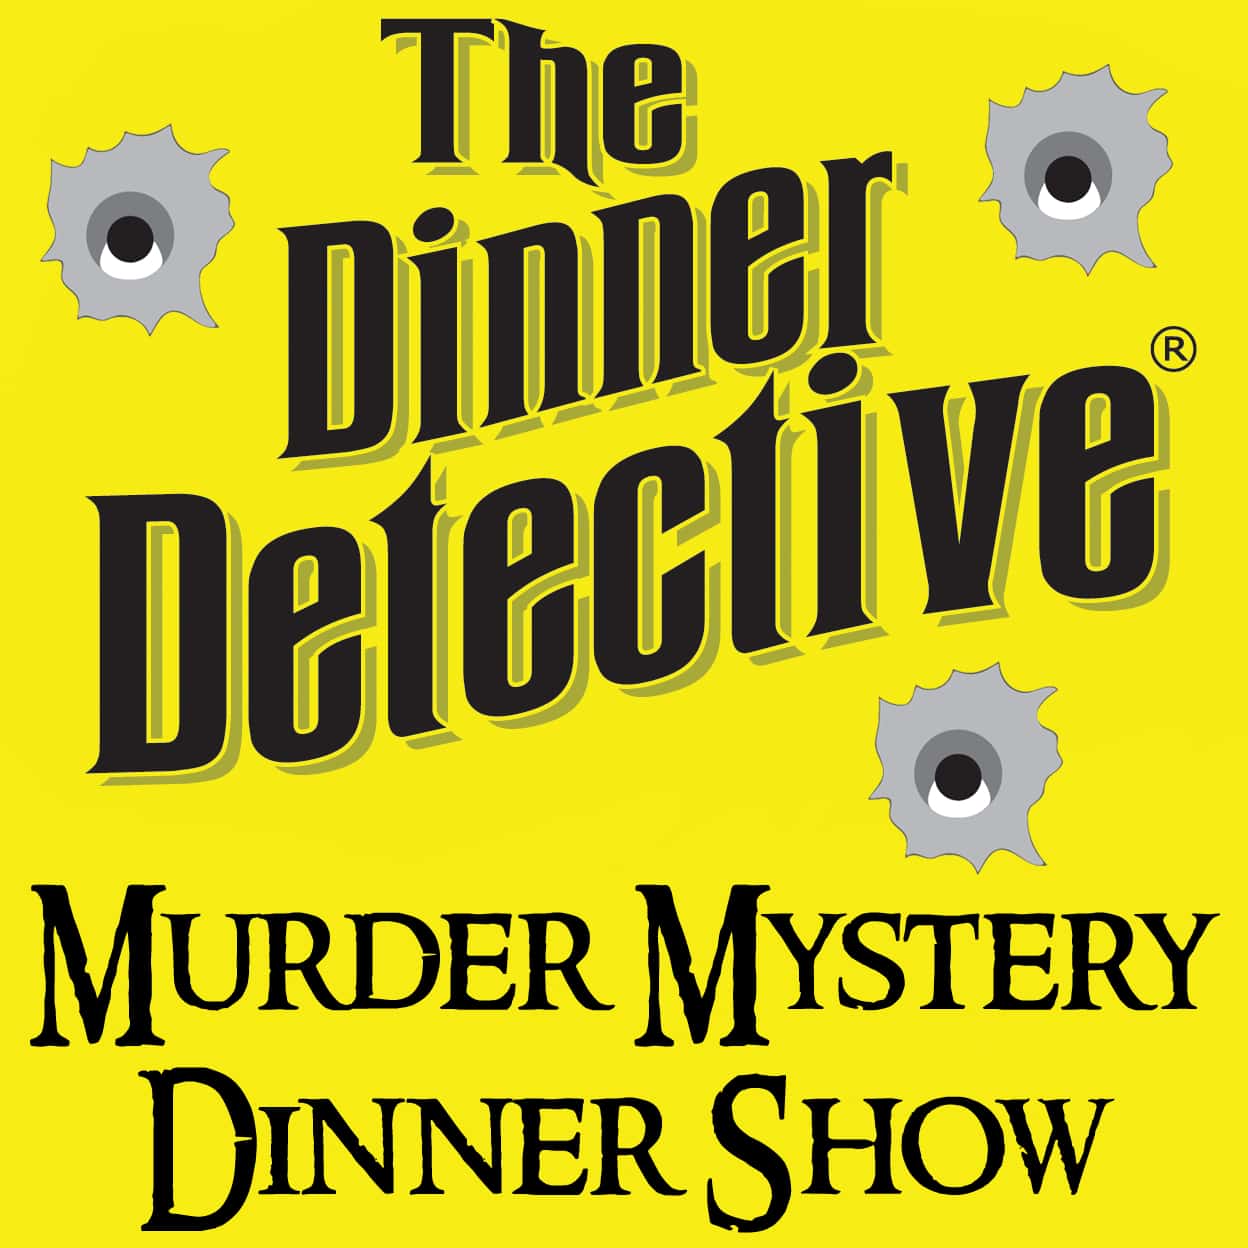 The Dinner Detective Murder Mystery Company